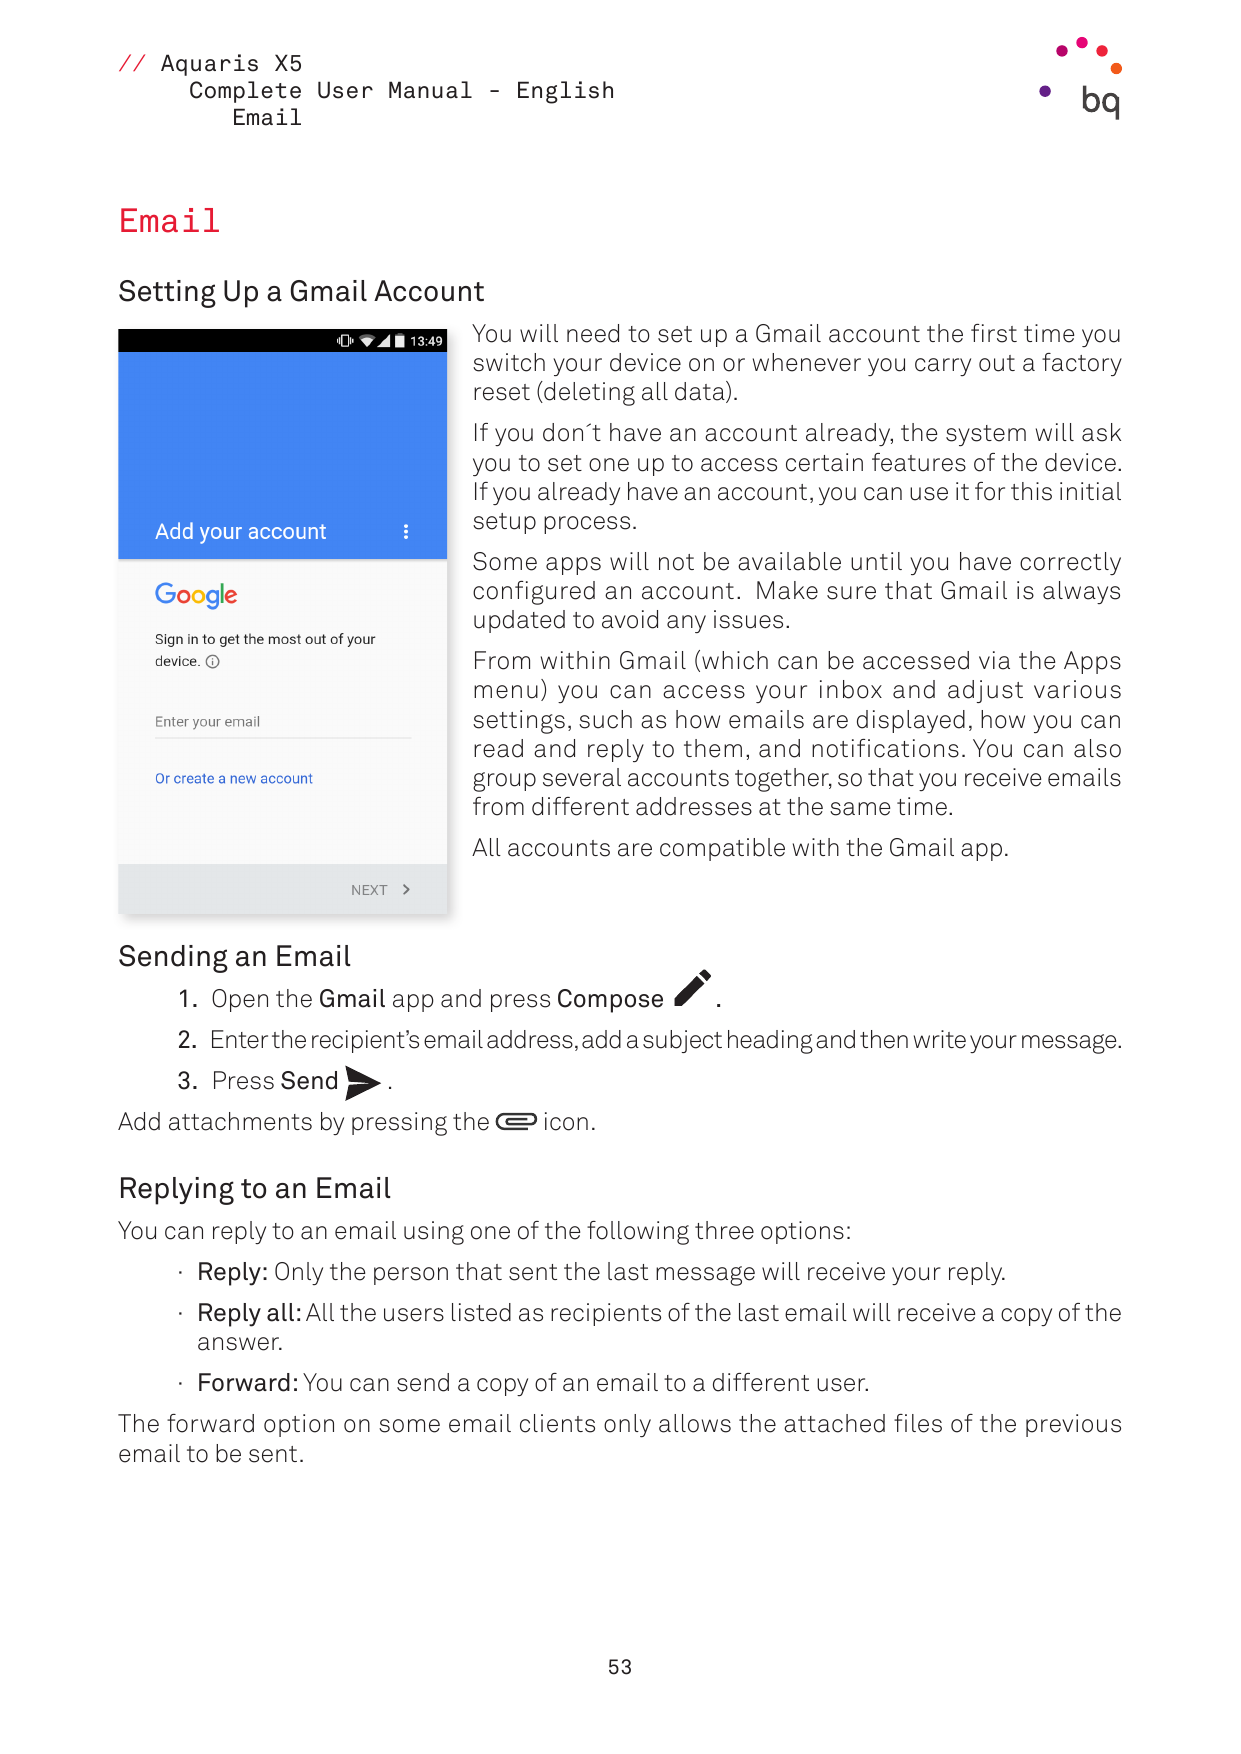 // Aquaris X5Complete User Manual - EnglishEmailEmailSetting Up a Gmail AccountYou will need to set up a Gmail account the first